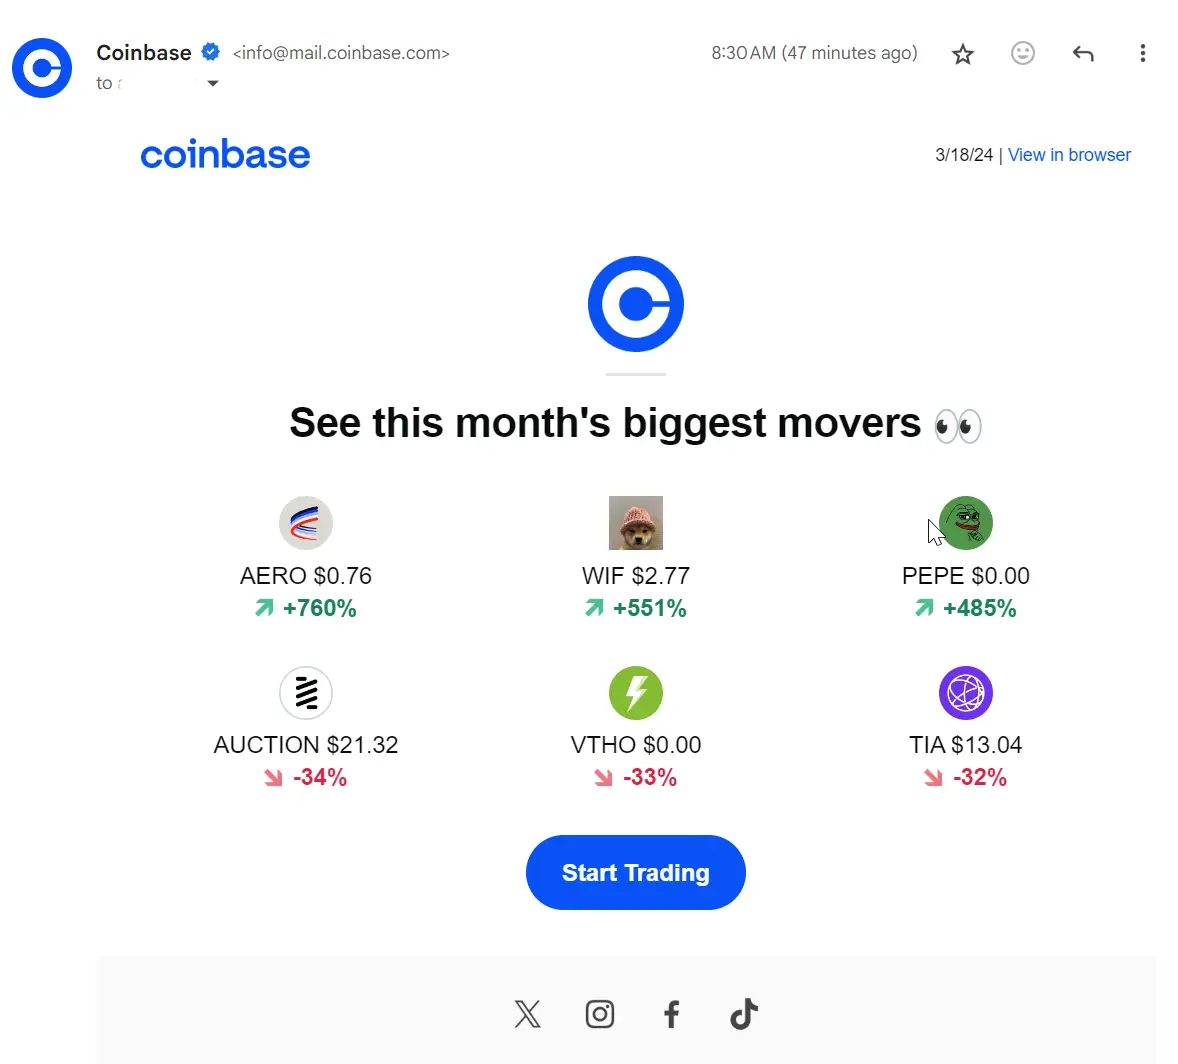 Coinbase marketing email